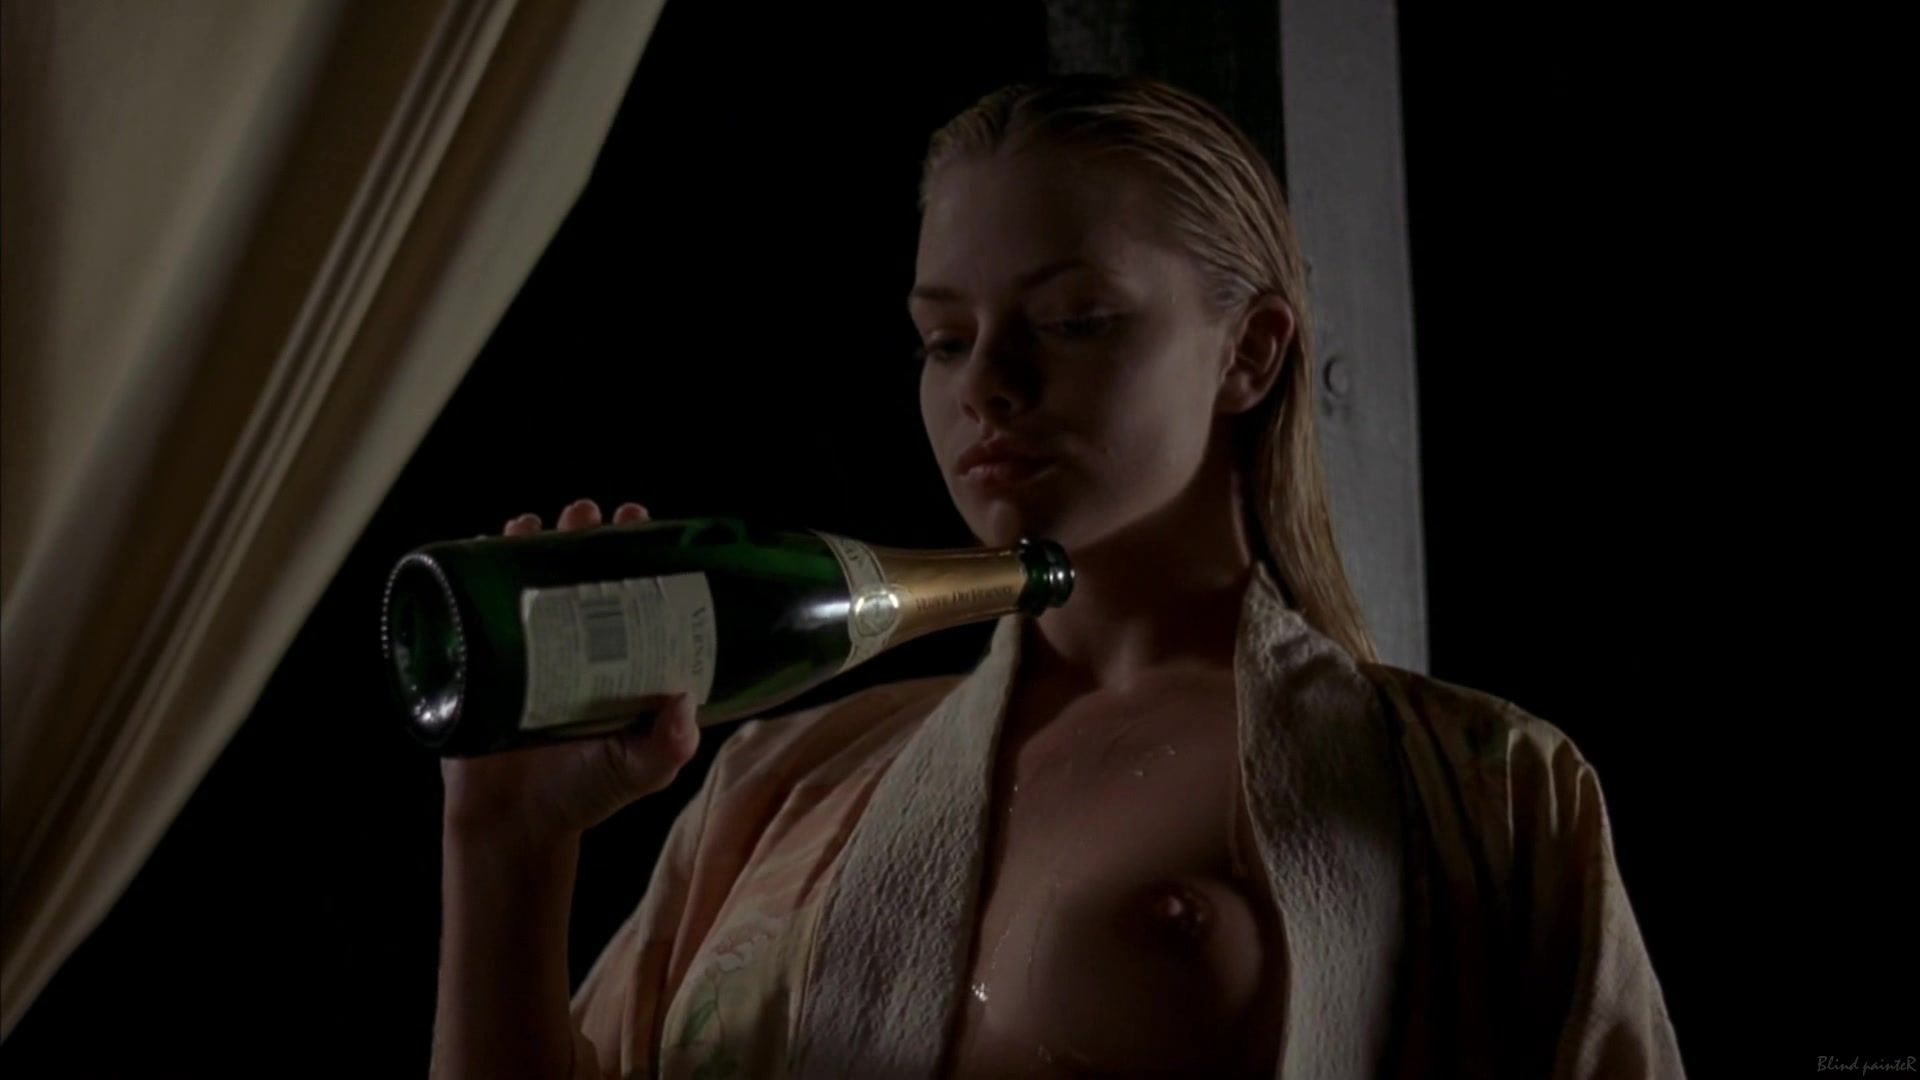 Hair Jaime Pressly nude - Poison Ivy 3 (1997) Big Natural Tits - 2